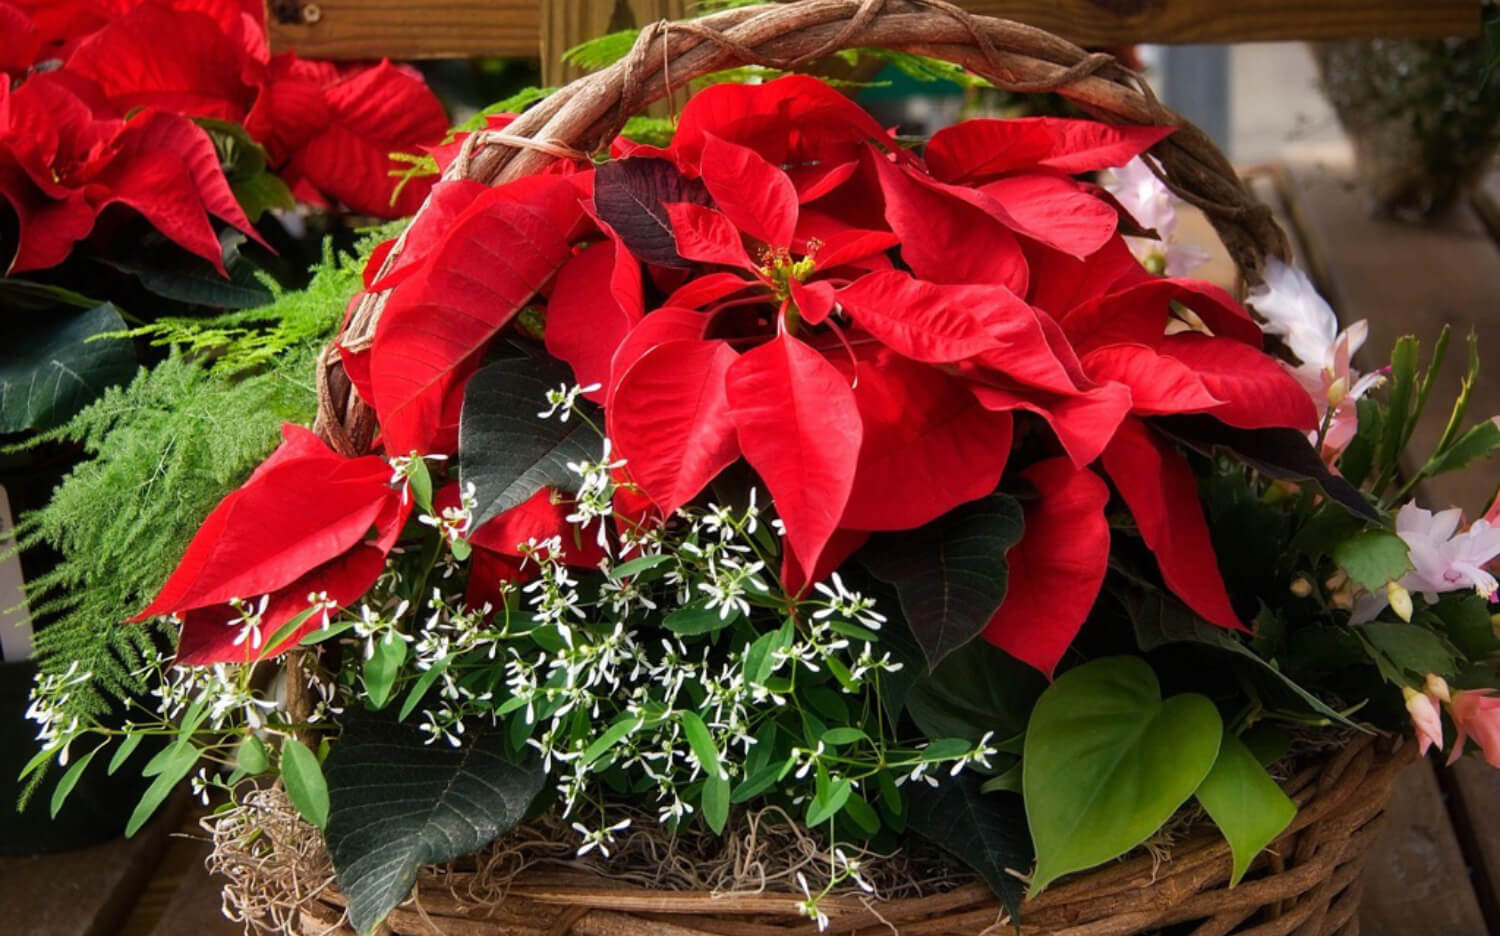 red poinsettia planted in basket with other plants